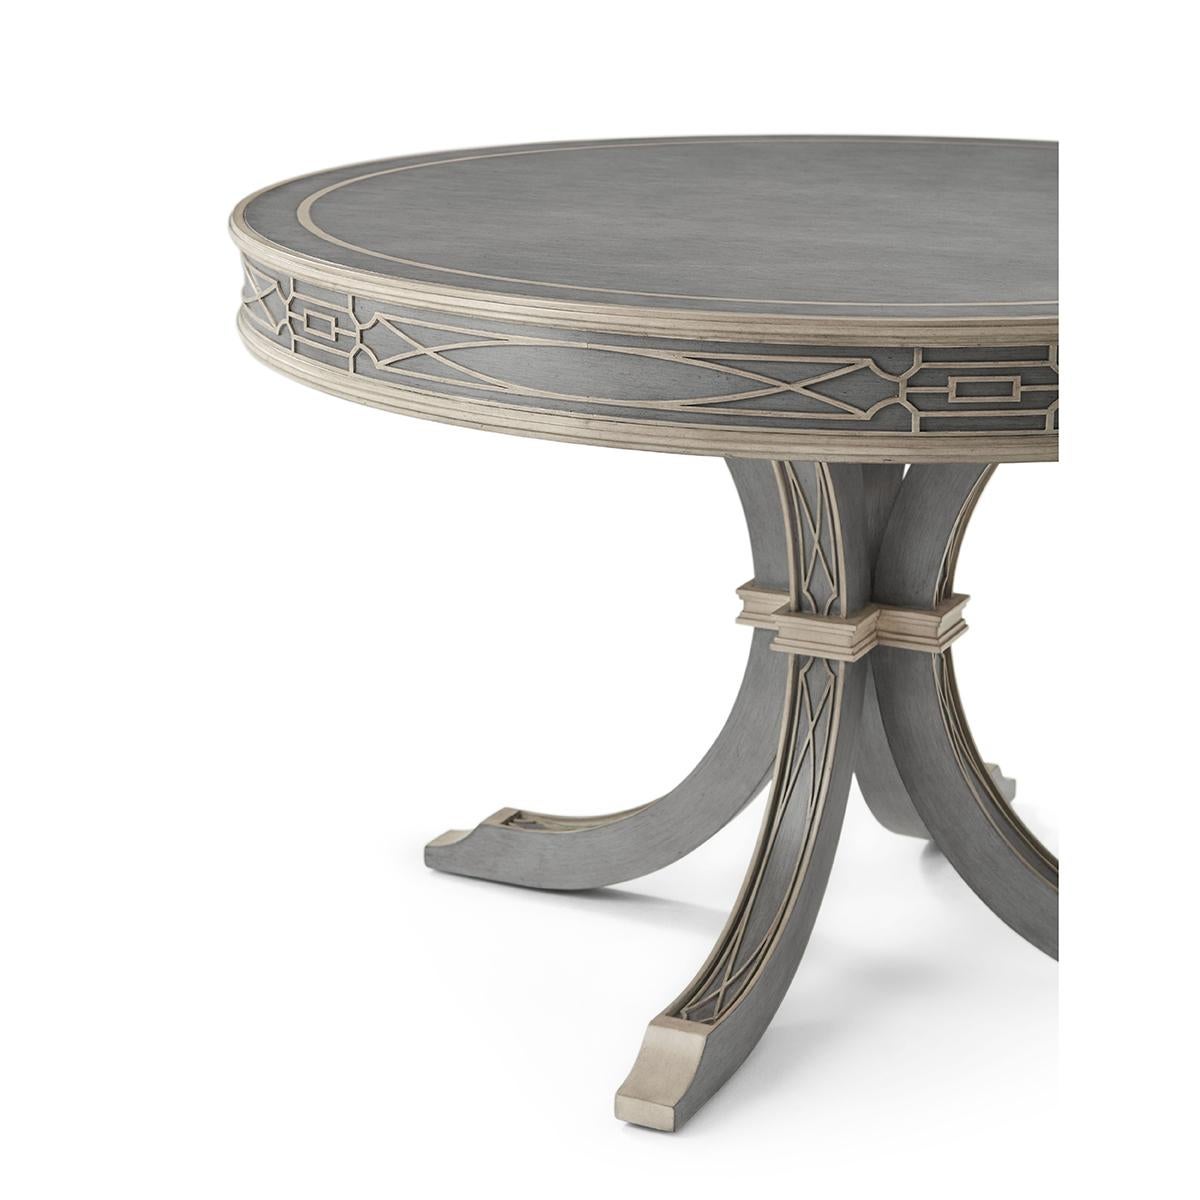 This elegant Grey Limestone finish painted center table with complimentary blind fretwork and trim. With a molded apron above four inswept solid legs joined with a carved collar.
An updated modern interpretation of the chinese chippendale influence